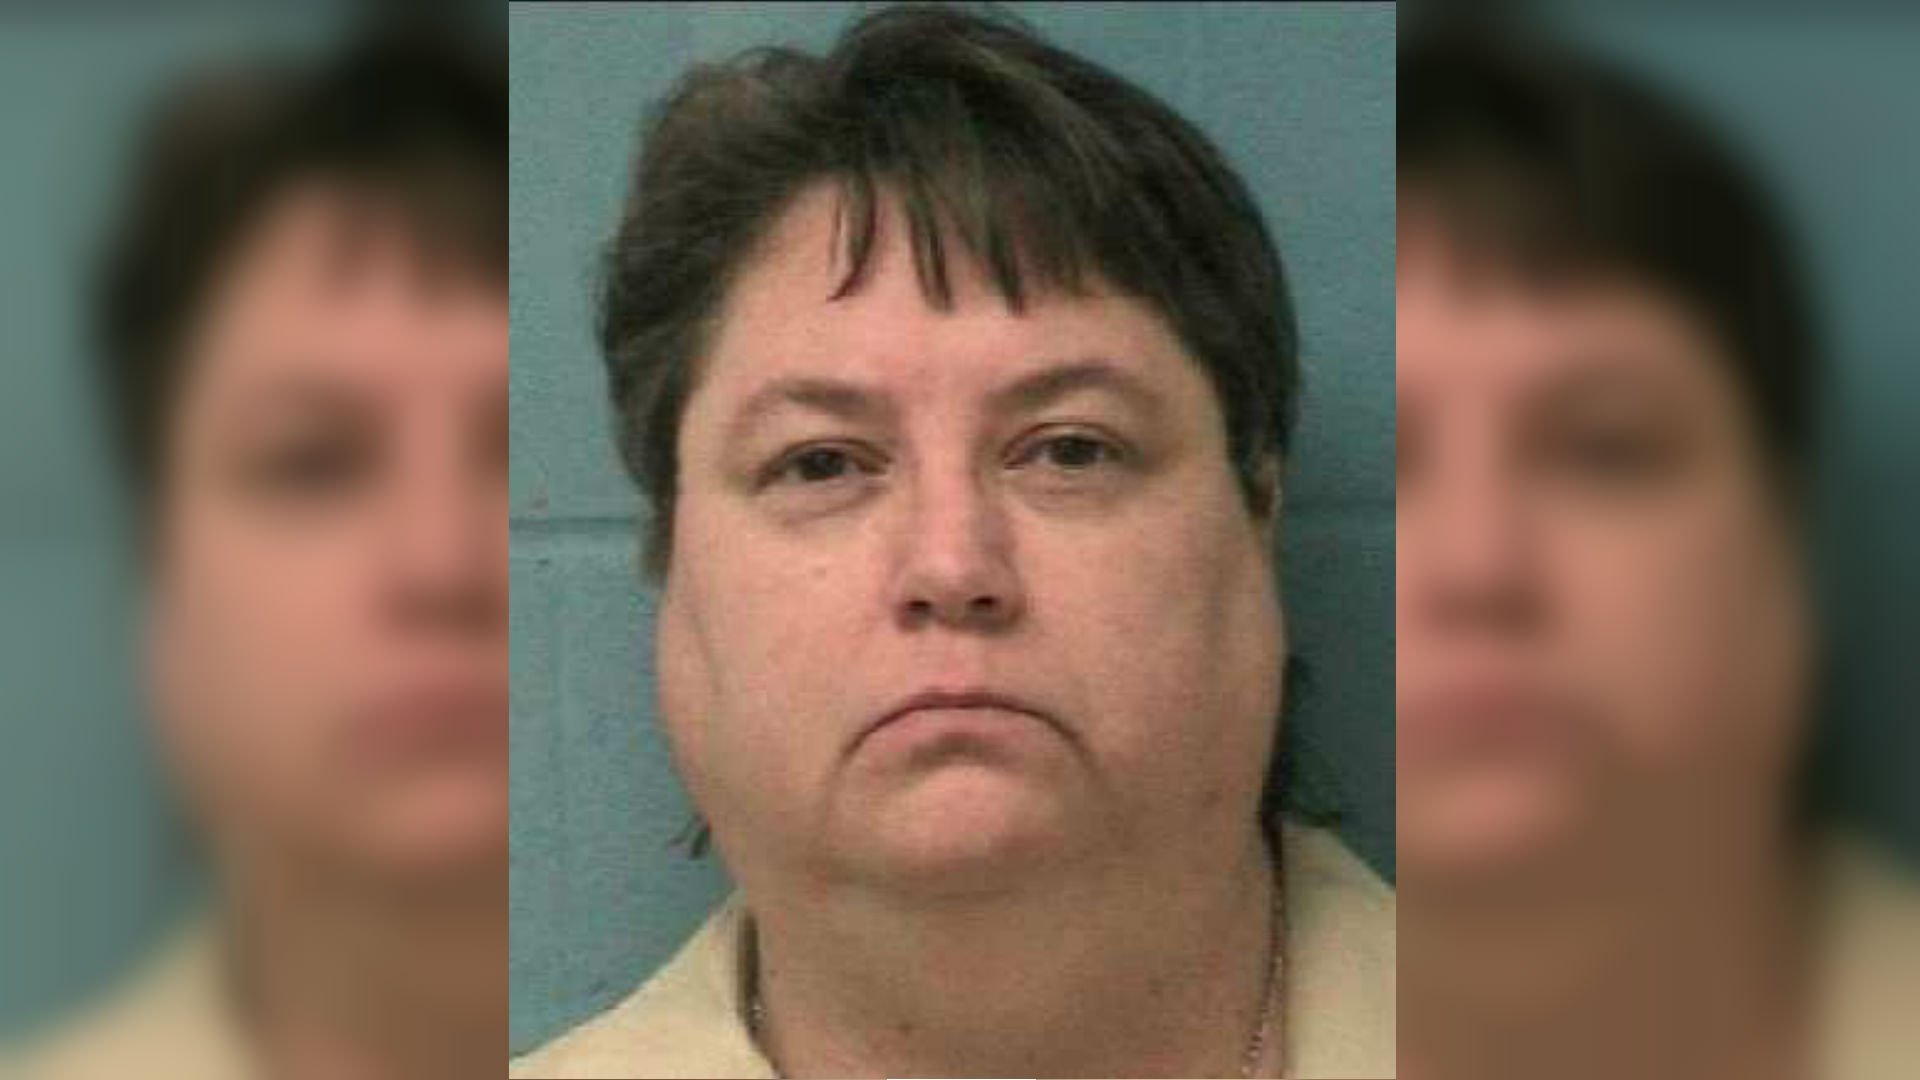 Kelly Renee Gissendaner, 47, was convicted in a February 1997 murder plot that targeted her husband in suburban Atlanta, Georgia.